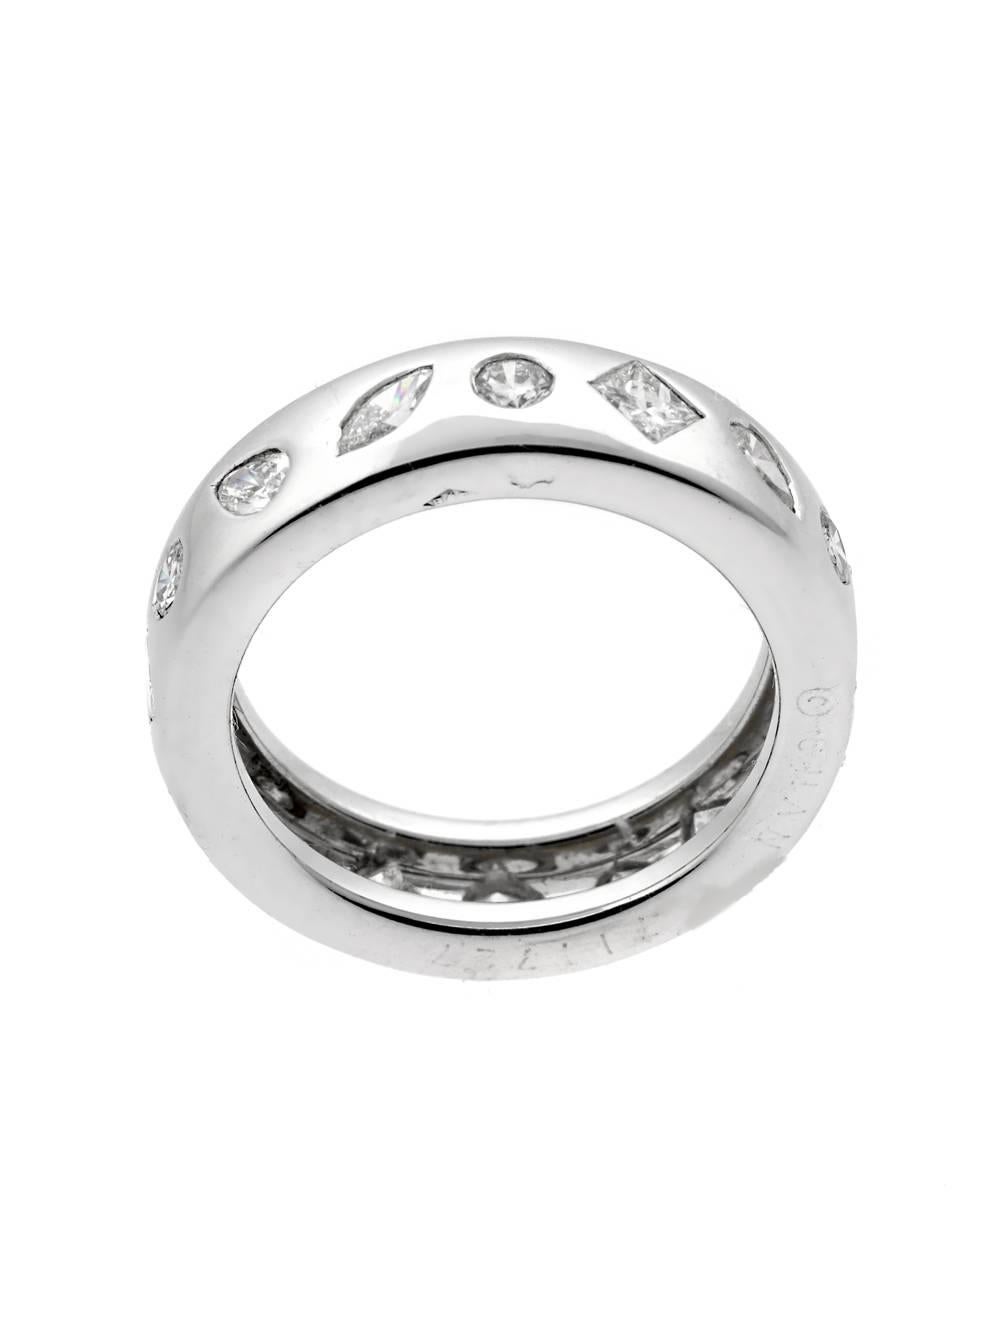 Old and new come together in this 18-karat white gold band. To give the ring its traditional style, artisans formed the setting from classic white gold. For the contemporary elements, they added diamonds featuring various cuts such as marquise,